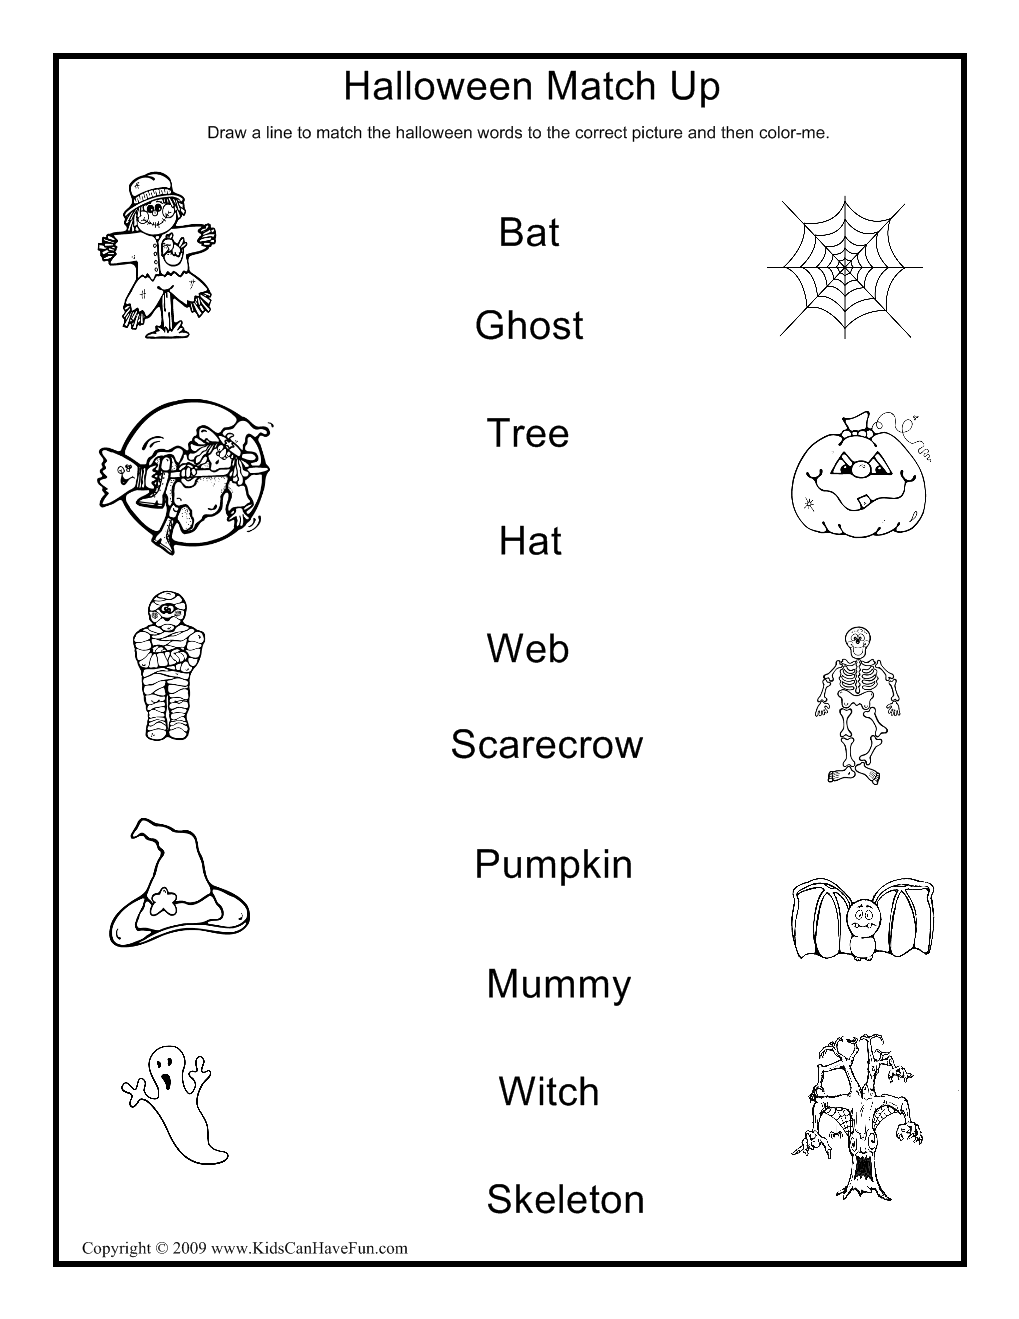 Halloween Match Up Activity | English Worksheets For Kids